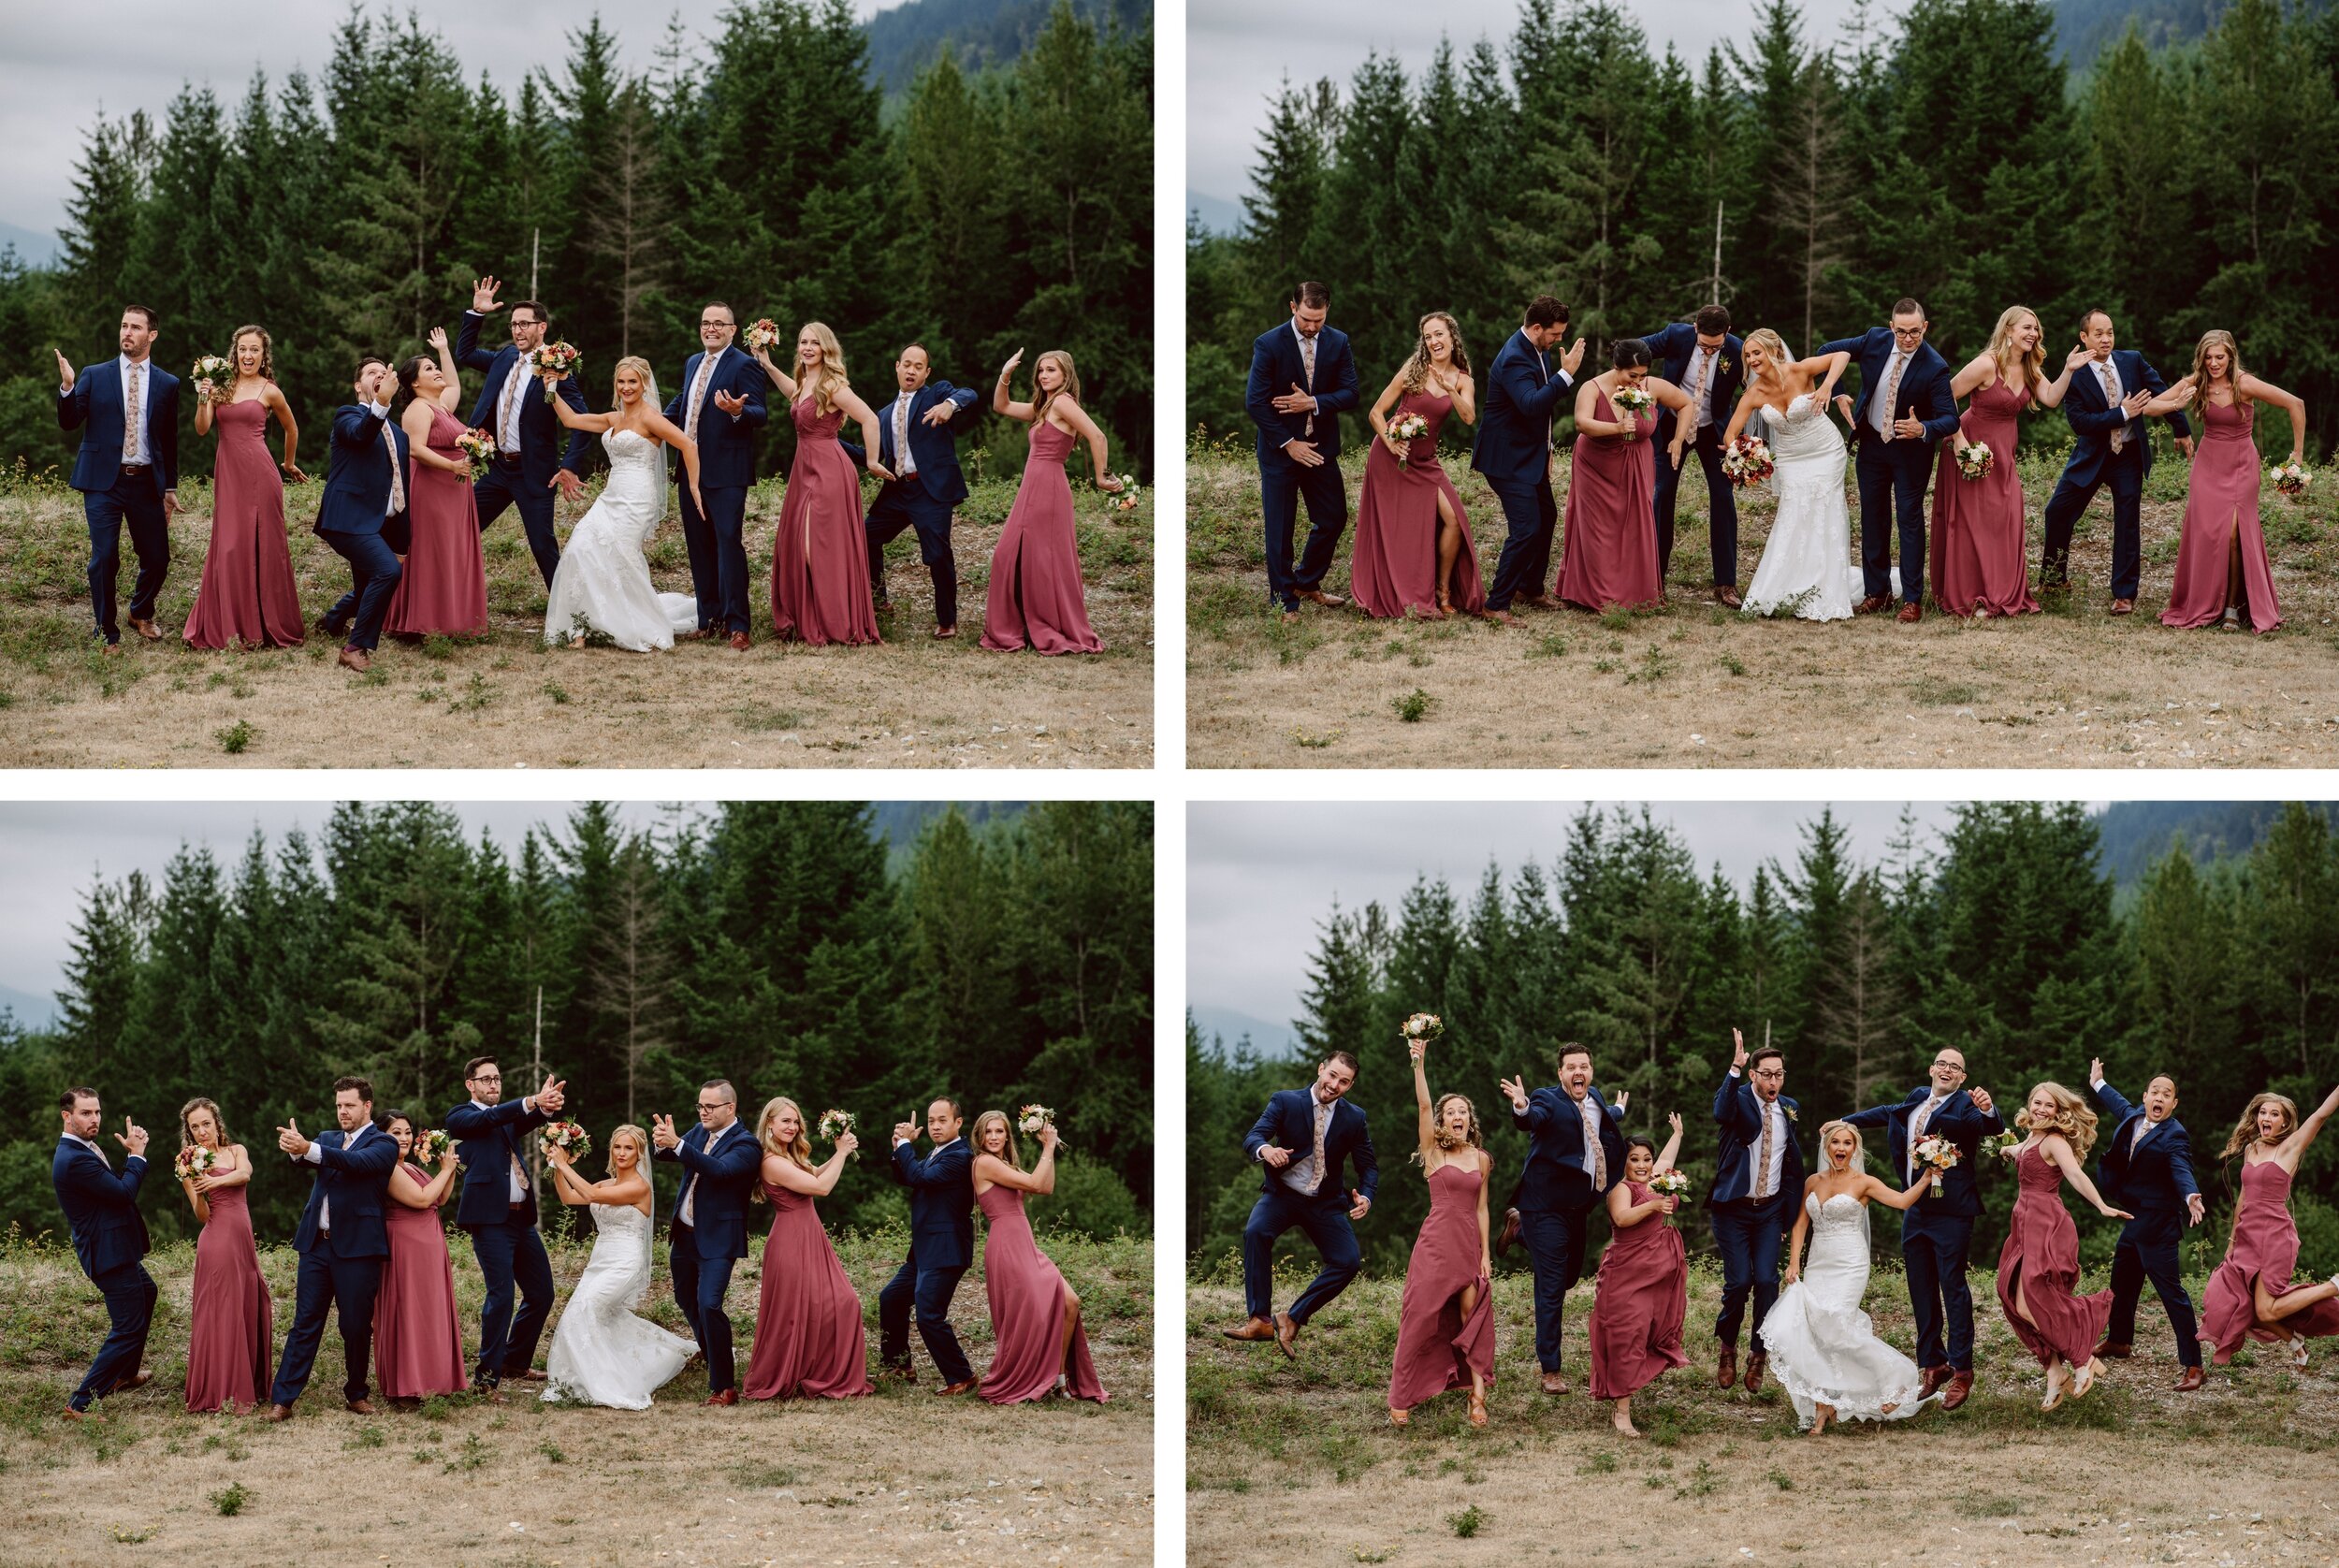 Bride and groom with their wedding party doing several different silly poses